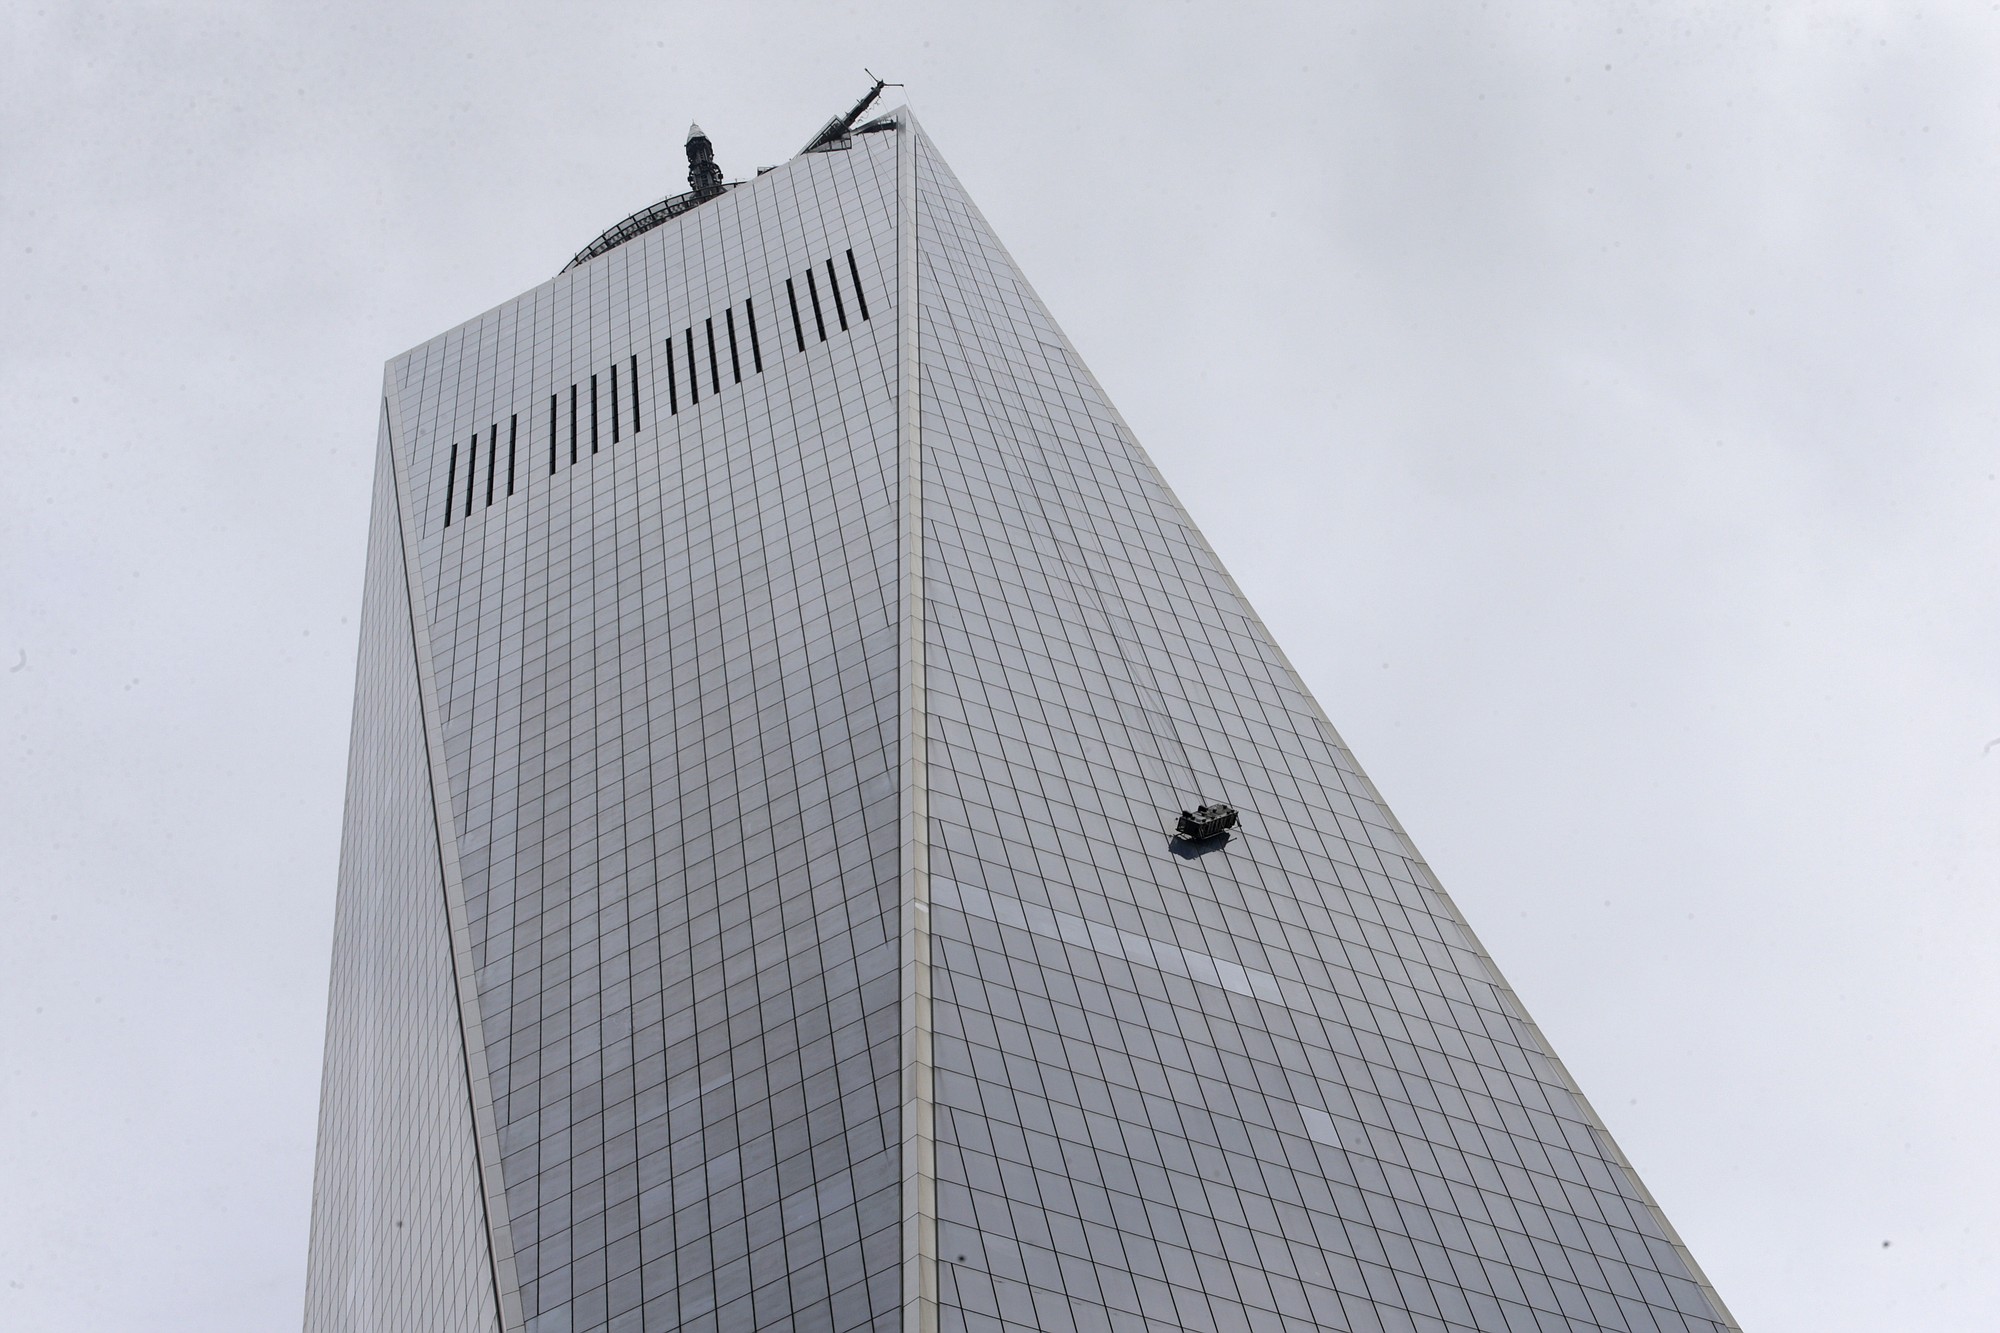 A partially collapsed scaffolding hangs from the 1  World Trade Center in New York, Wednesday, Nov. 12, 2014. New York City firefighters have been called to the nation's tallest skyscraper, where two workers are stuck on scaffolding 69 stories above street level.